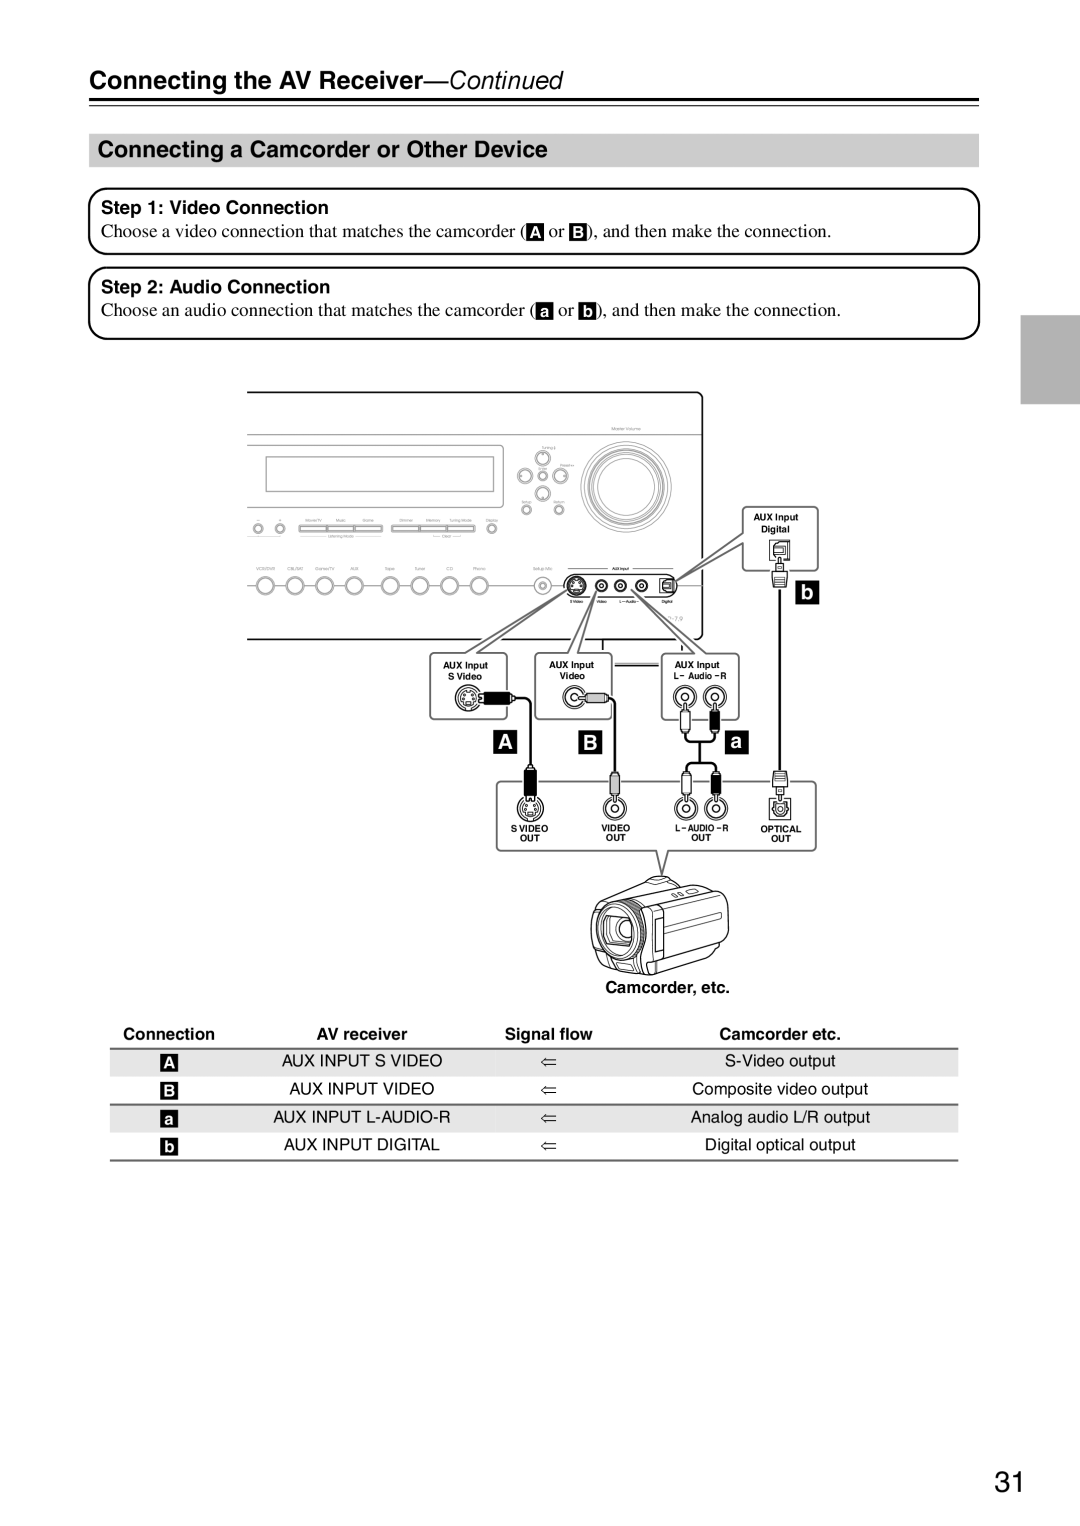 Onkyo DTR-7.9 instruction manual Connecting a Camcorder or Other Device, Connecting the AV Receiver—Continued 